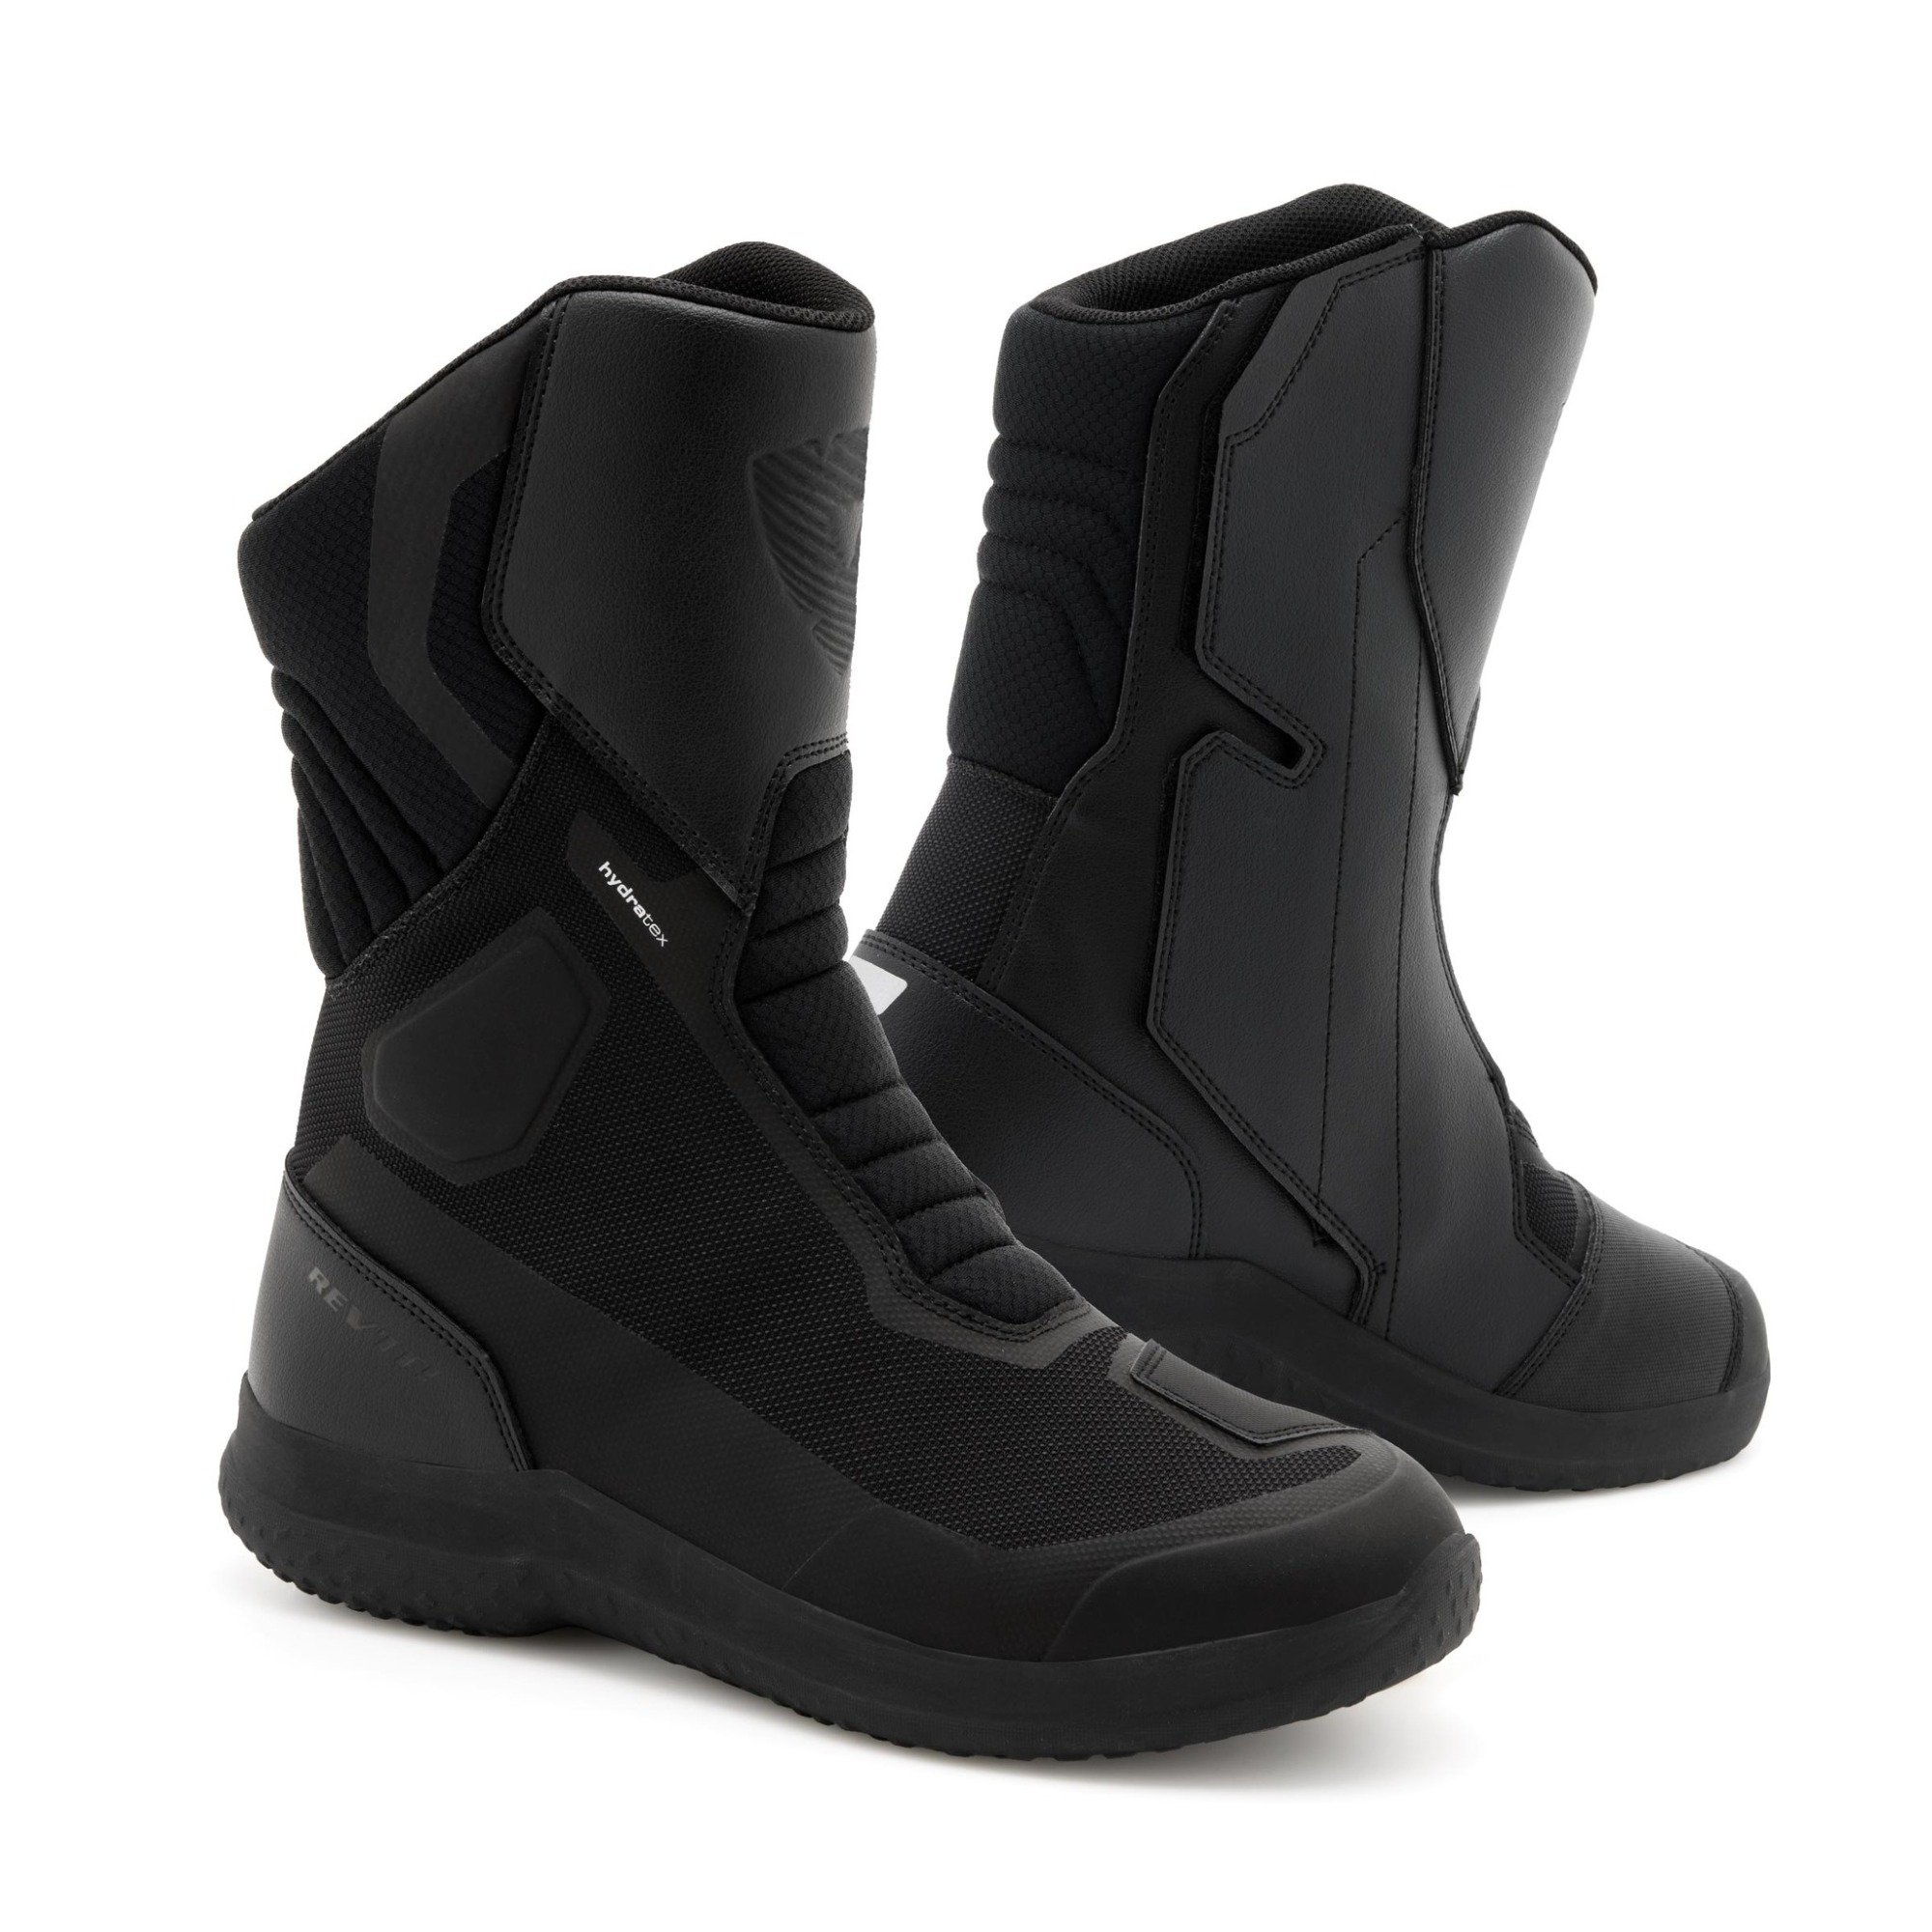 Image of REV'IT! Boots Pulse H2O Black Size 40 ID 8700001330619